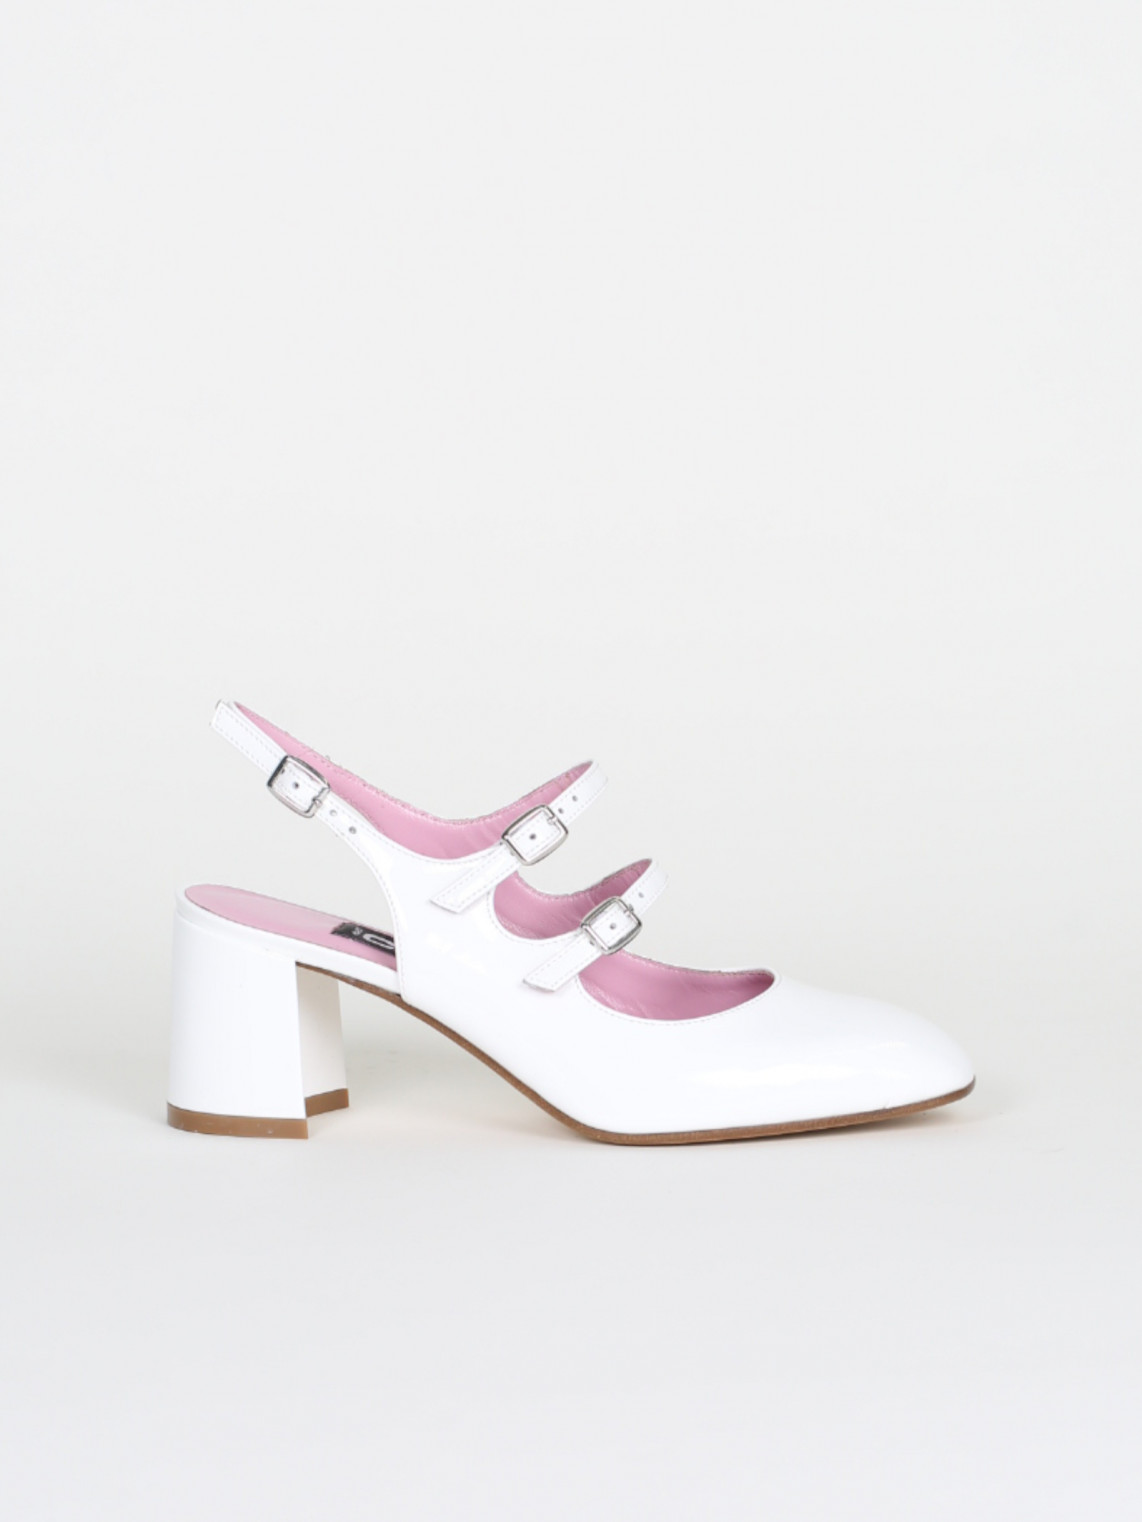 BANANA white patent leather mary janes | Carel Paris Shoes